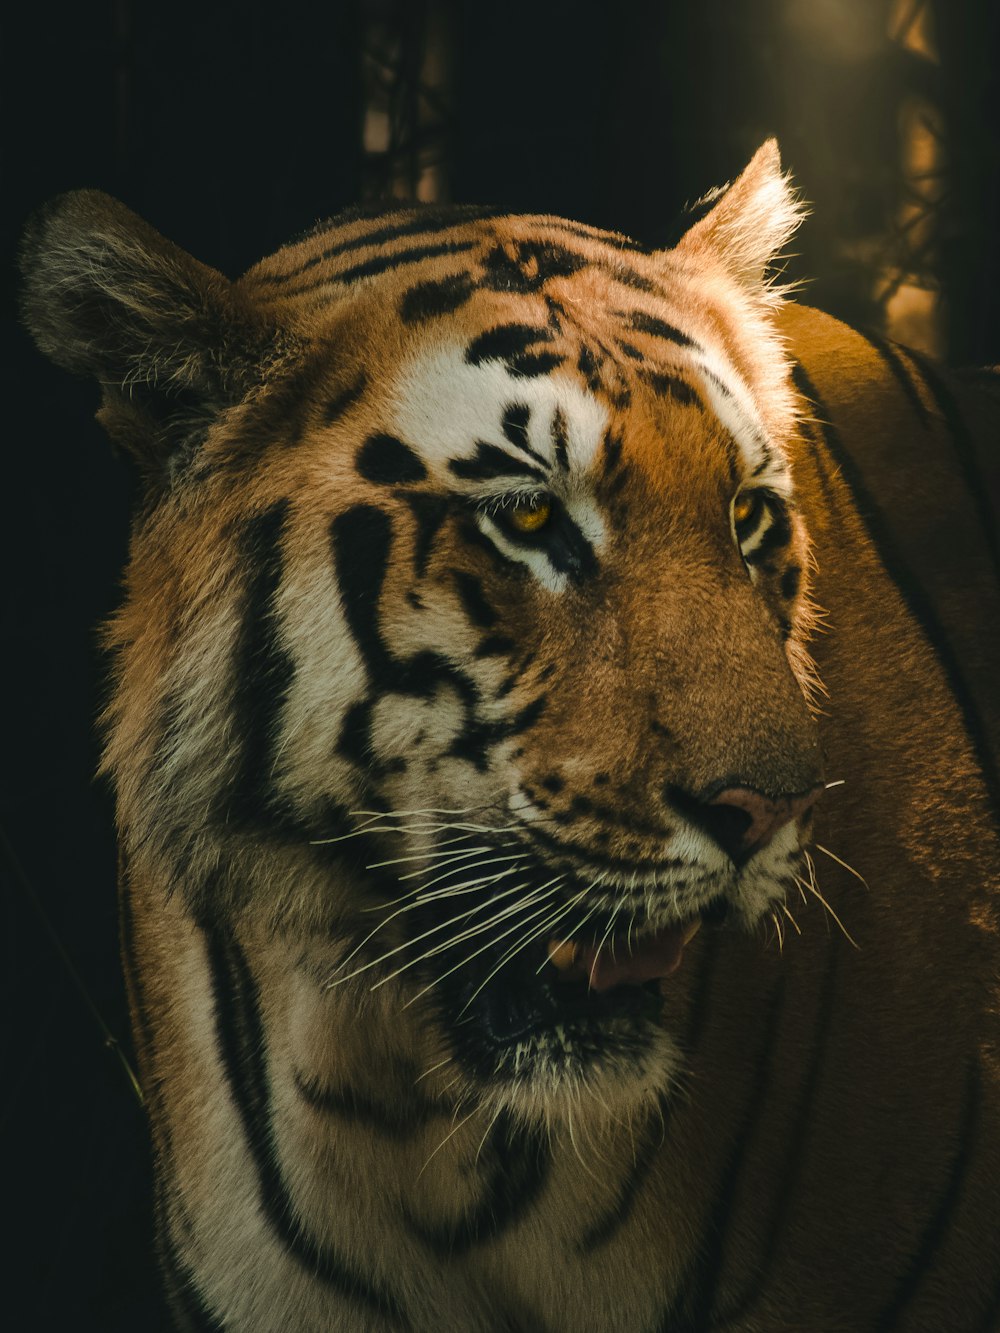 a close up of a tiger's face with it's mouth open